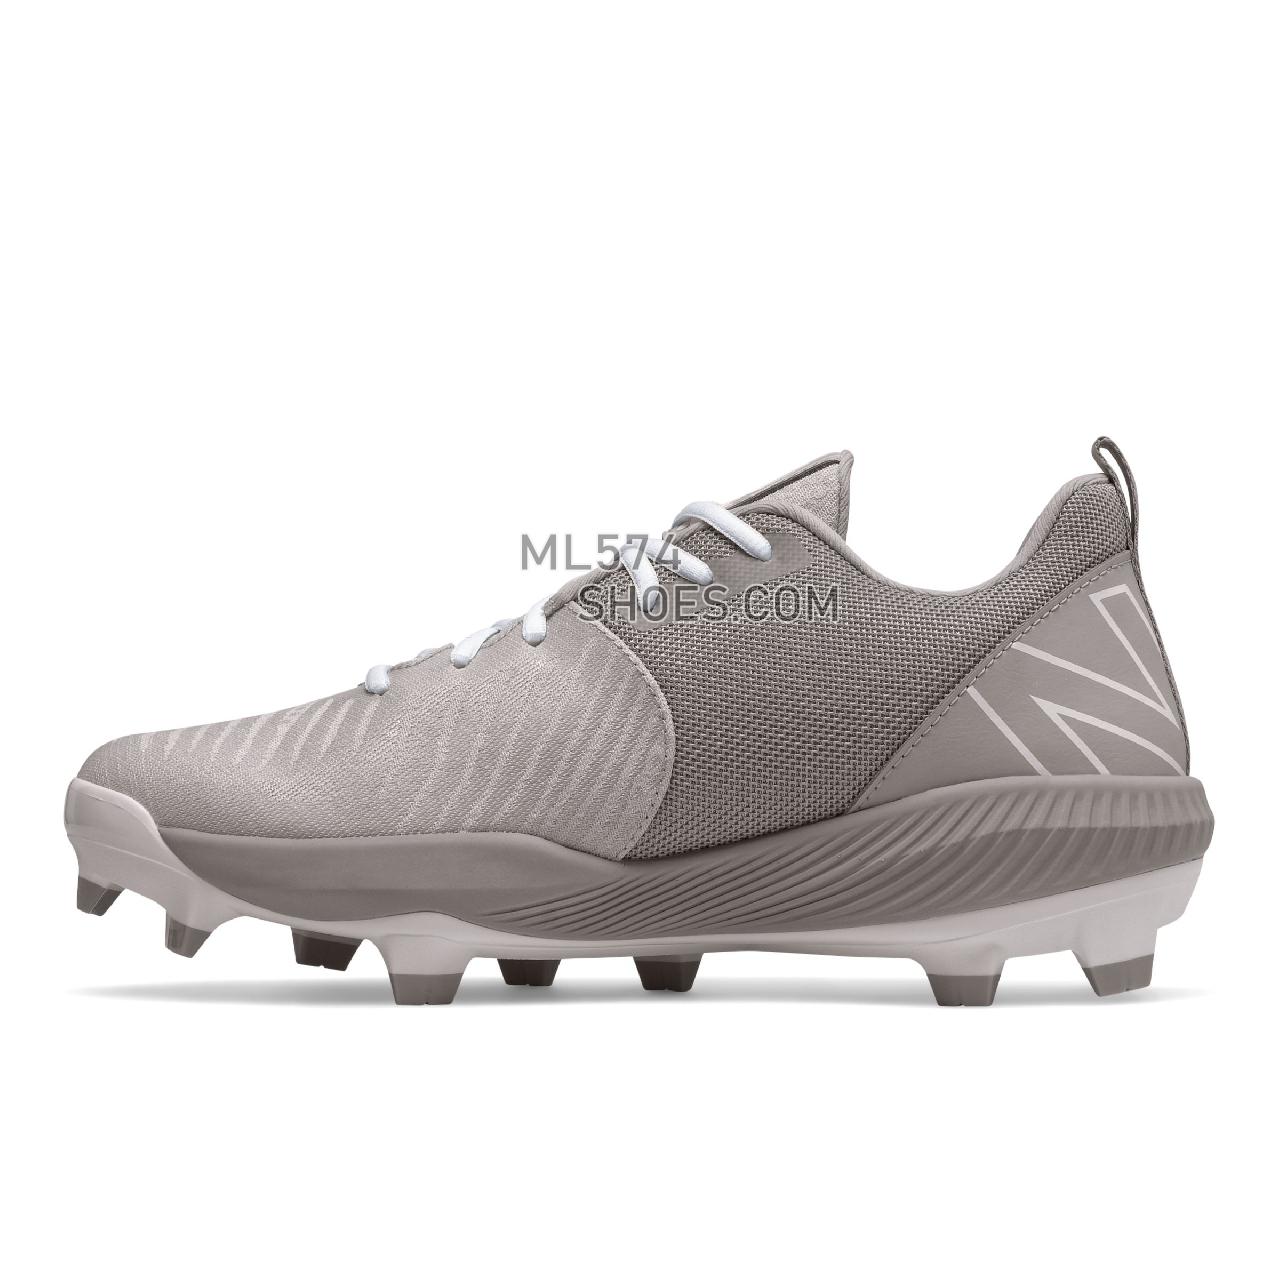 New Balance FuelCell 4040 v6 Molded - Men's Mid-Cut Baseball Cleats - Grey with White - PL4040G6